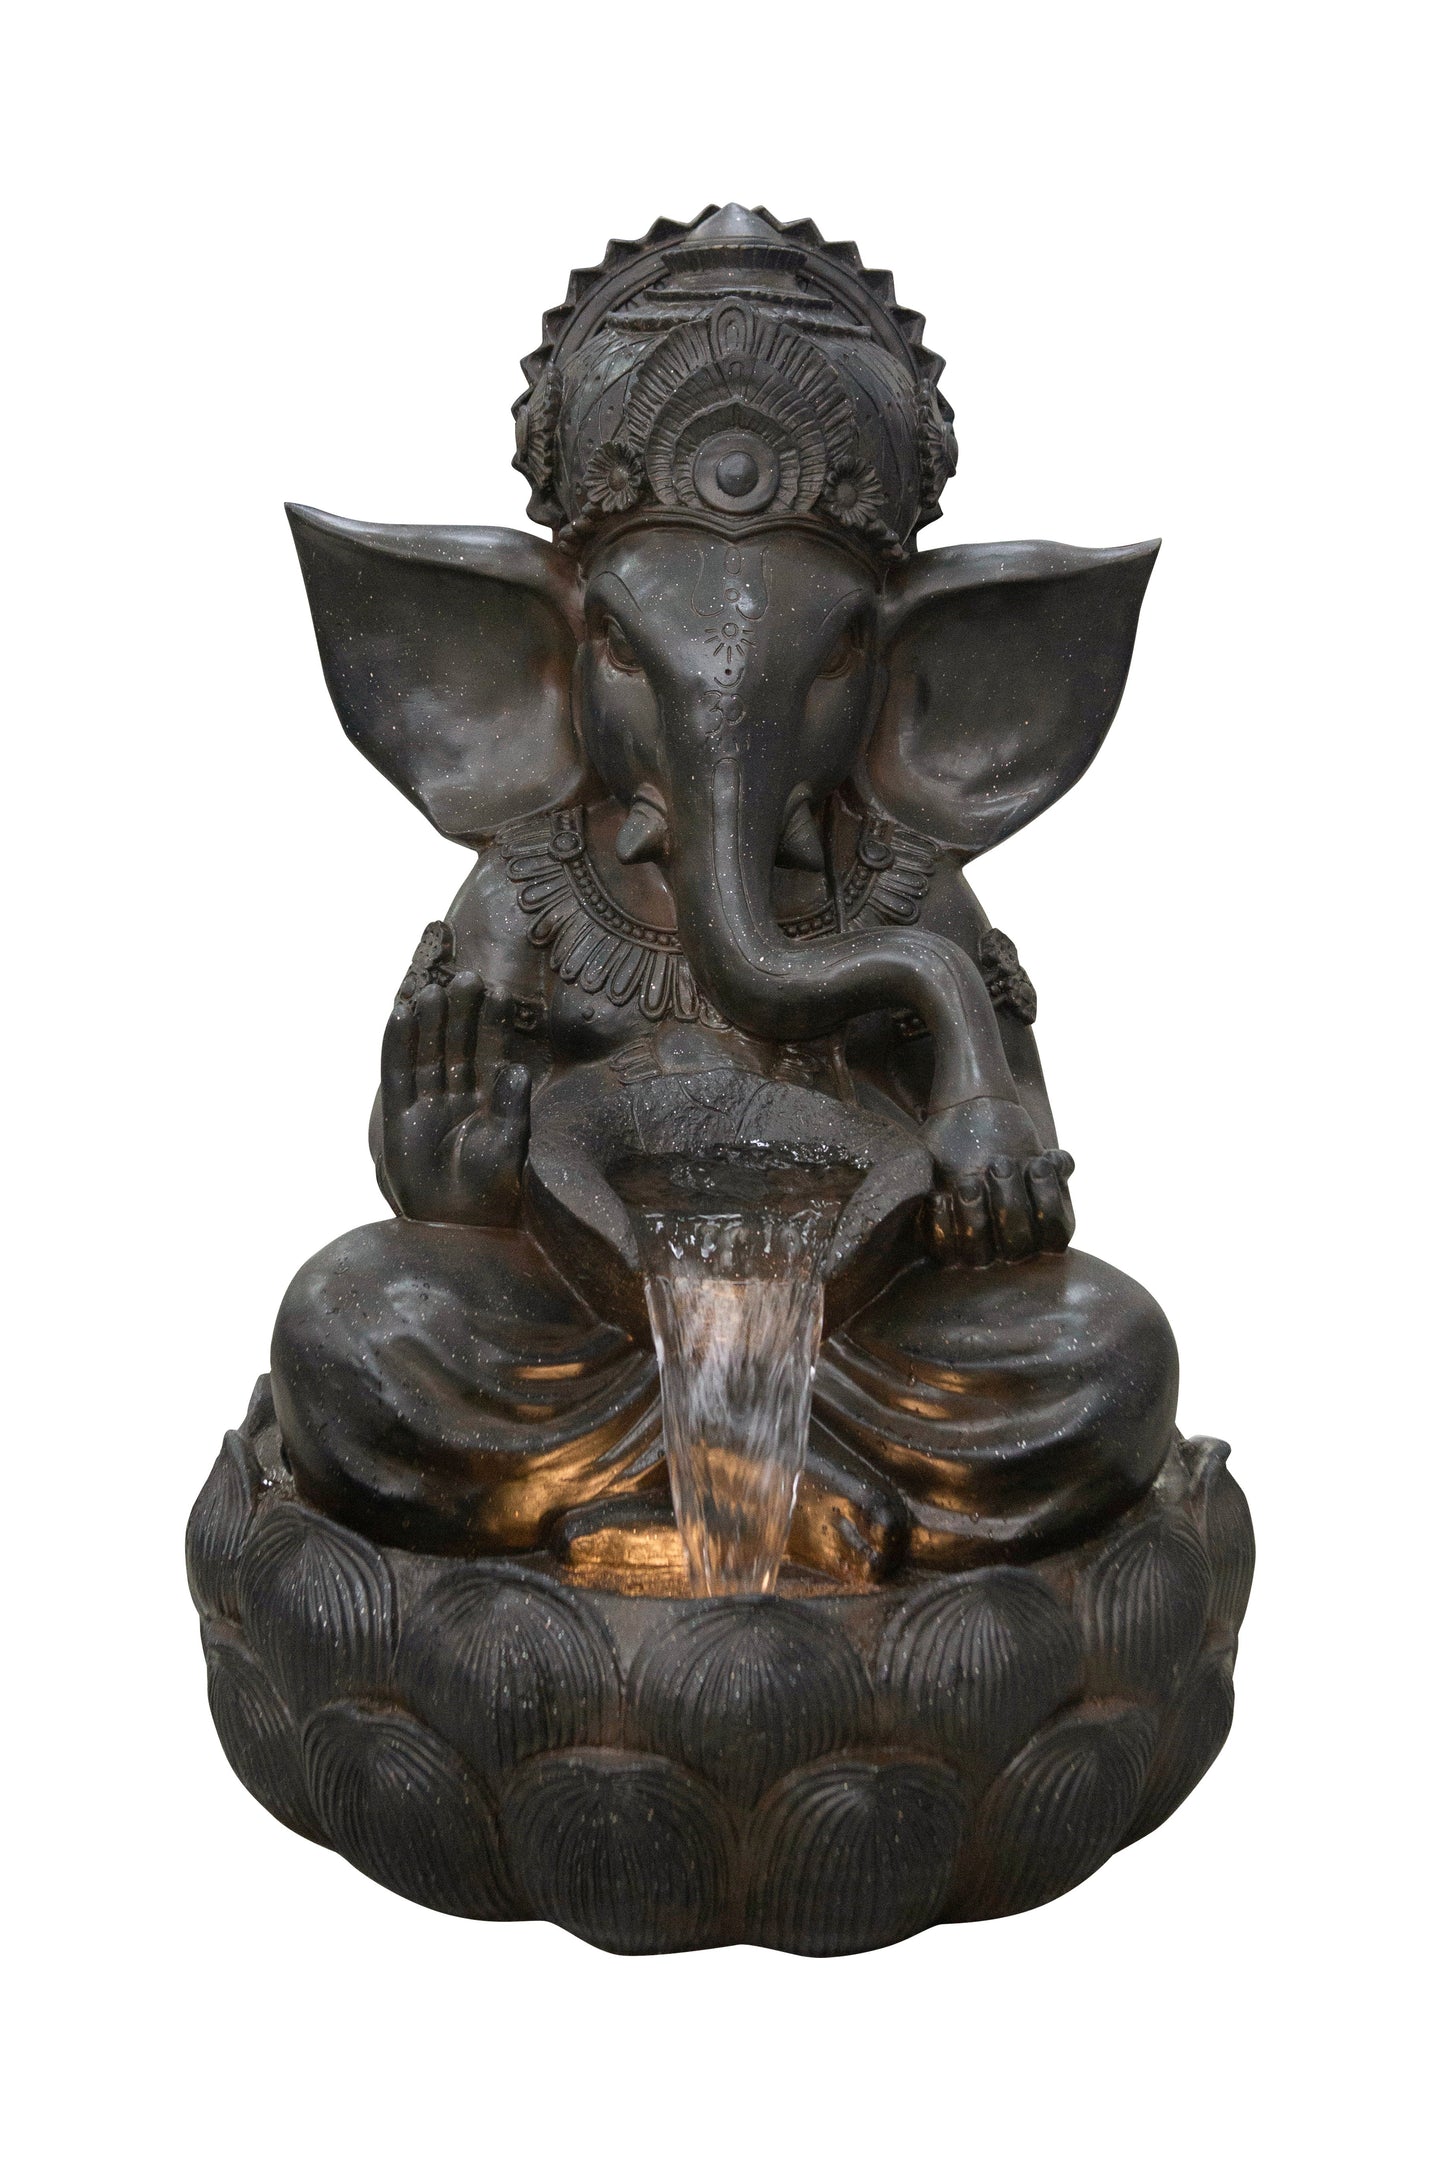 35in Ganesha Sculptural Outdoor Fountain With Ww Leds Hi-Line Gift Ltd.